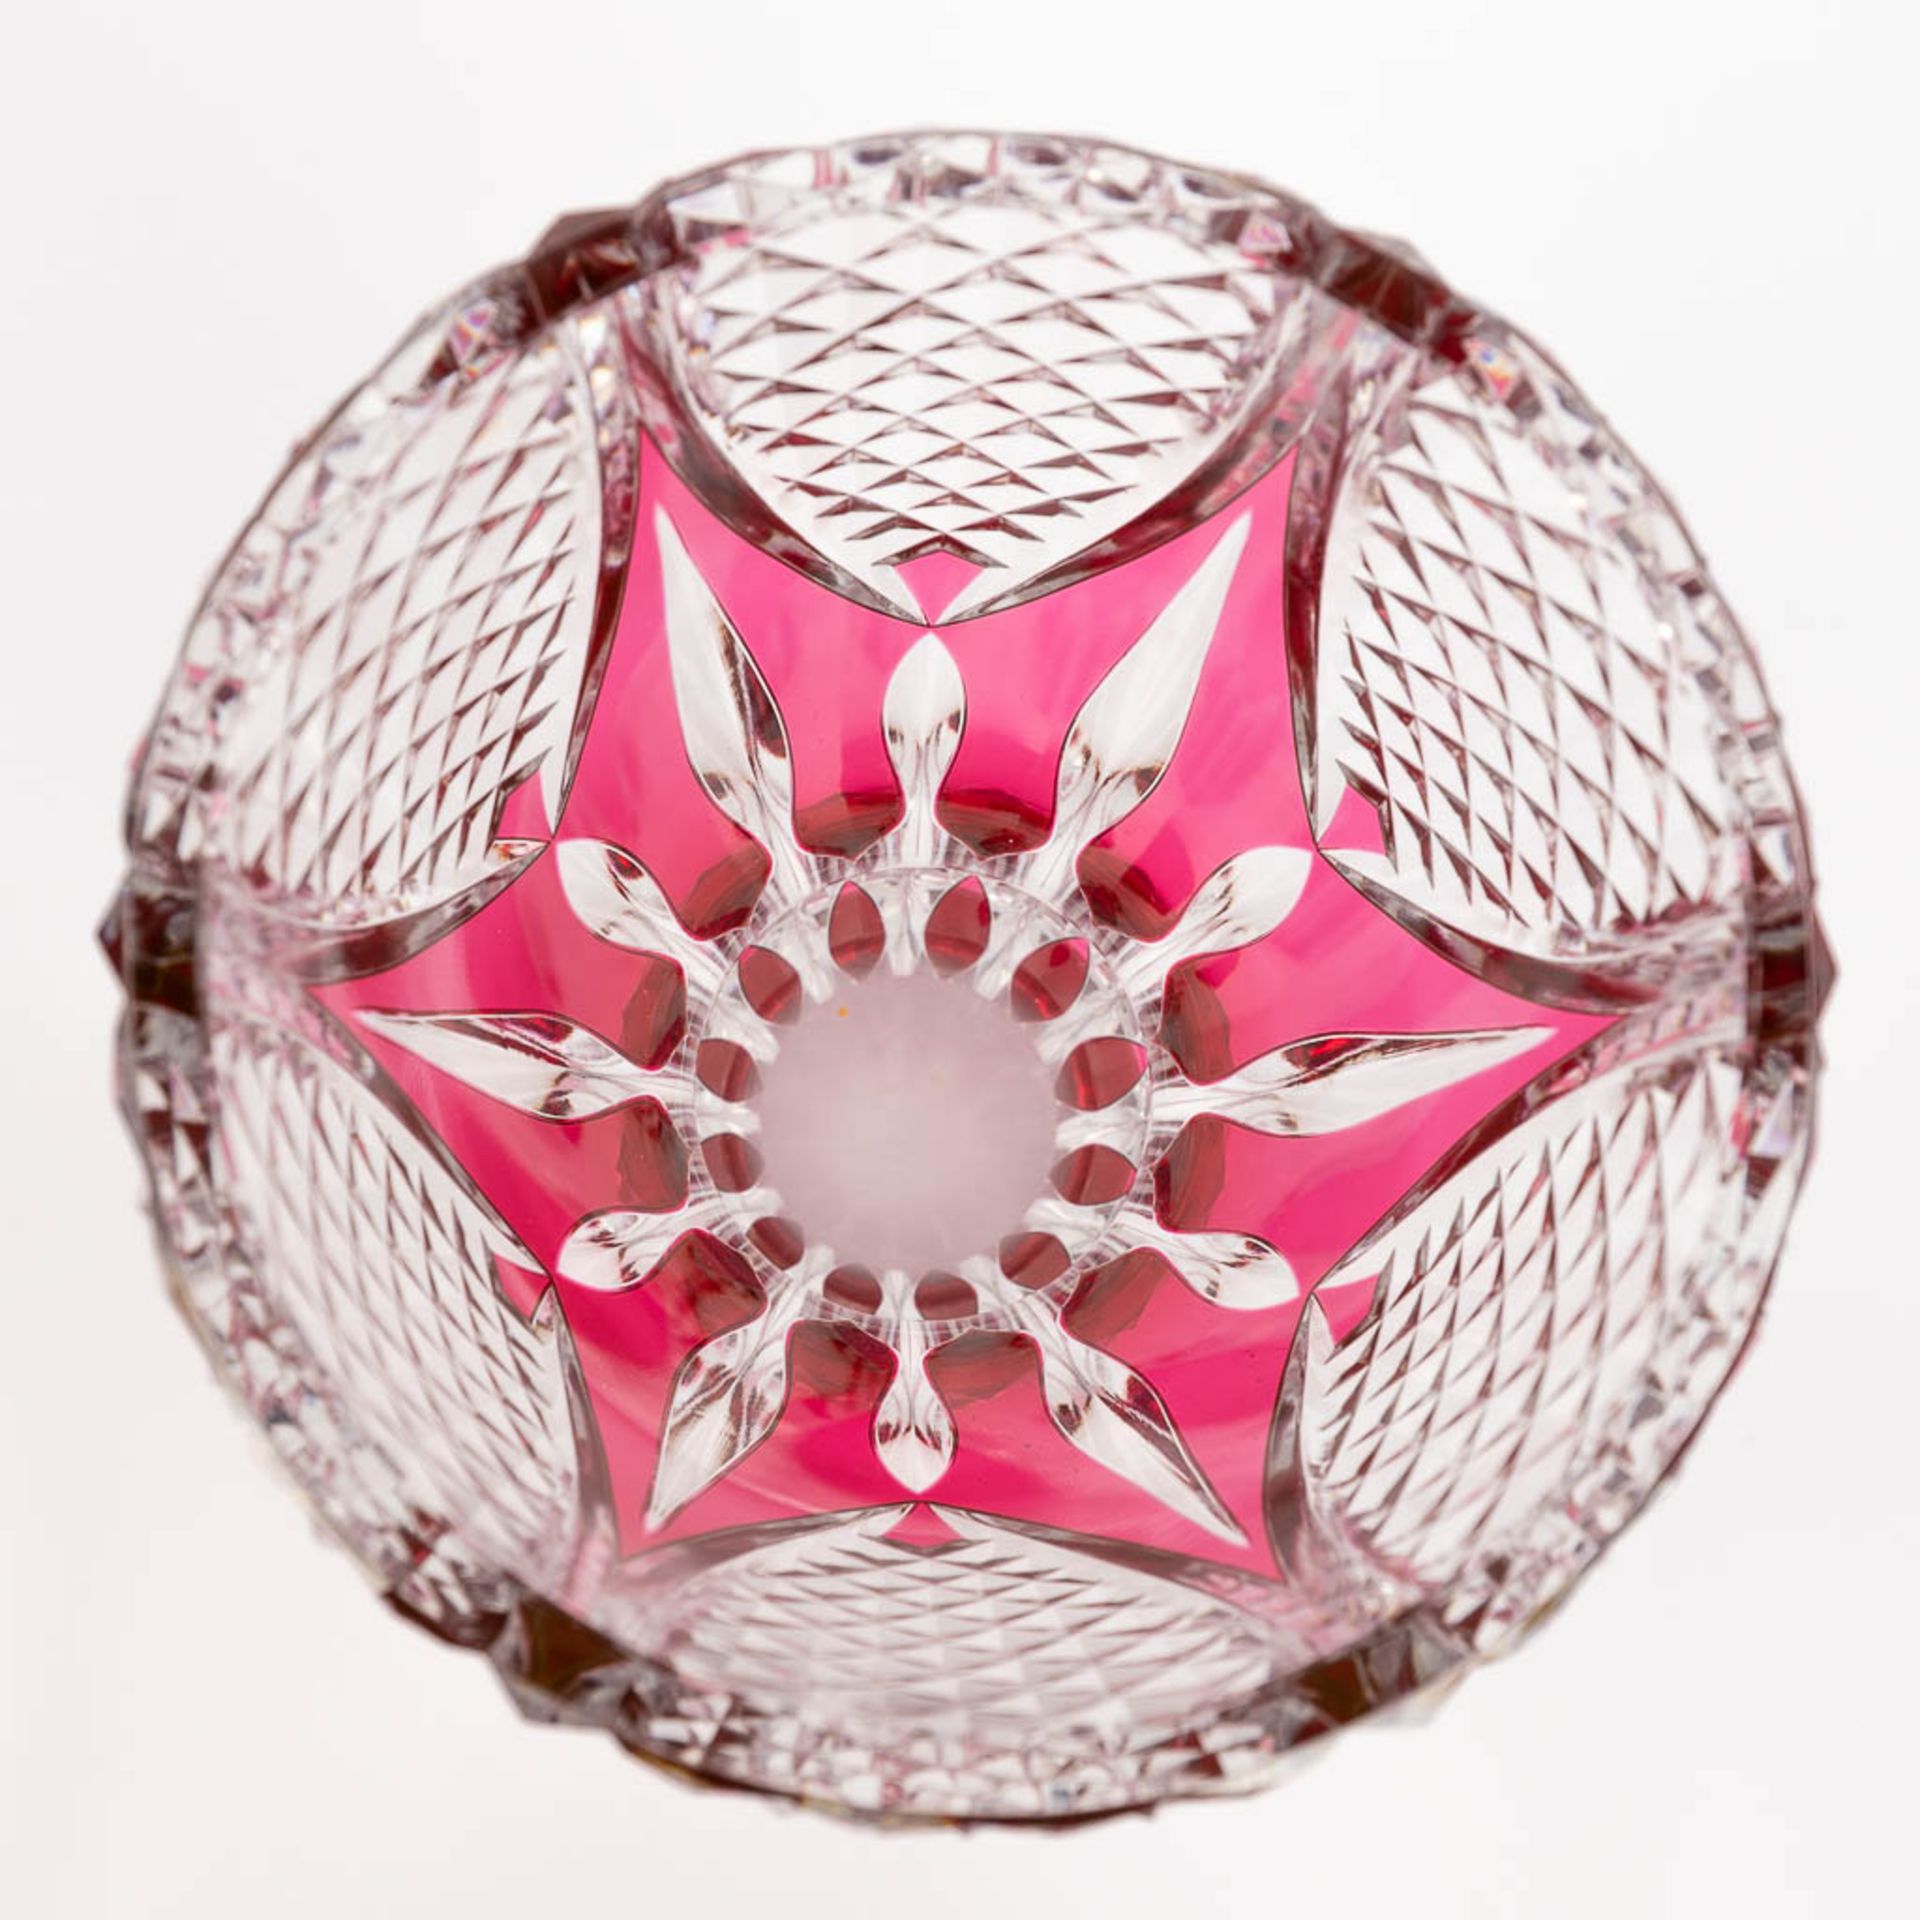 Val Saint Lambert, a vase made of red cut crystal. (H: 28,5 x D: 15,5 cm) - Image 9 of 13